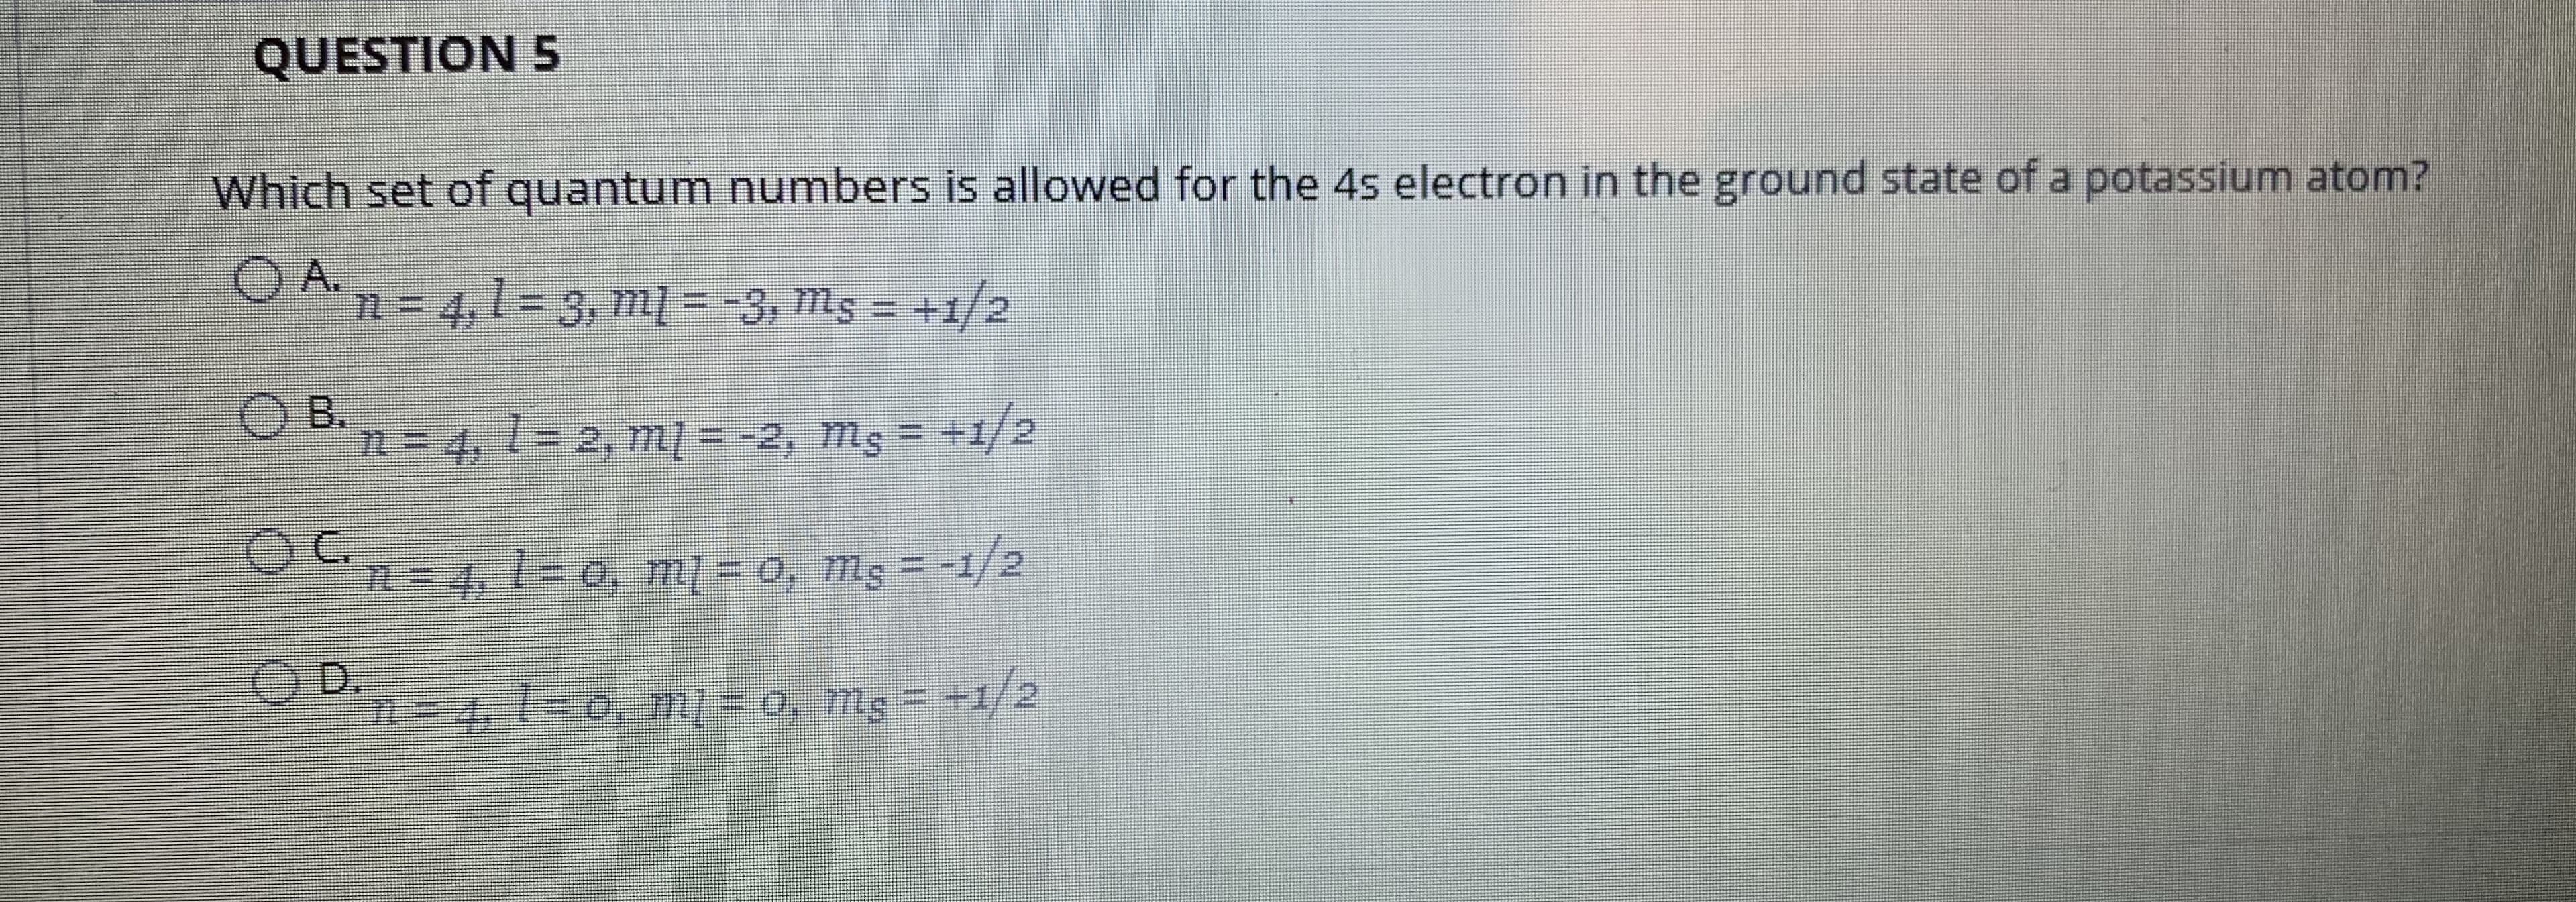 Which set of quantum numbers is allowed for the 4s electron in the ground state of a potassium atom?
